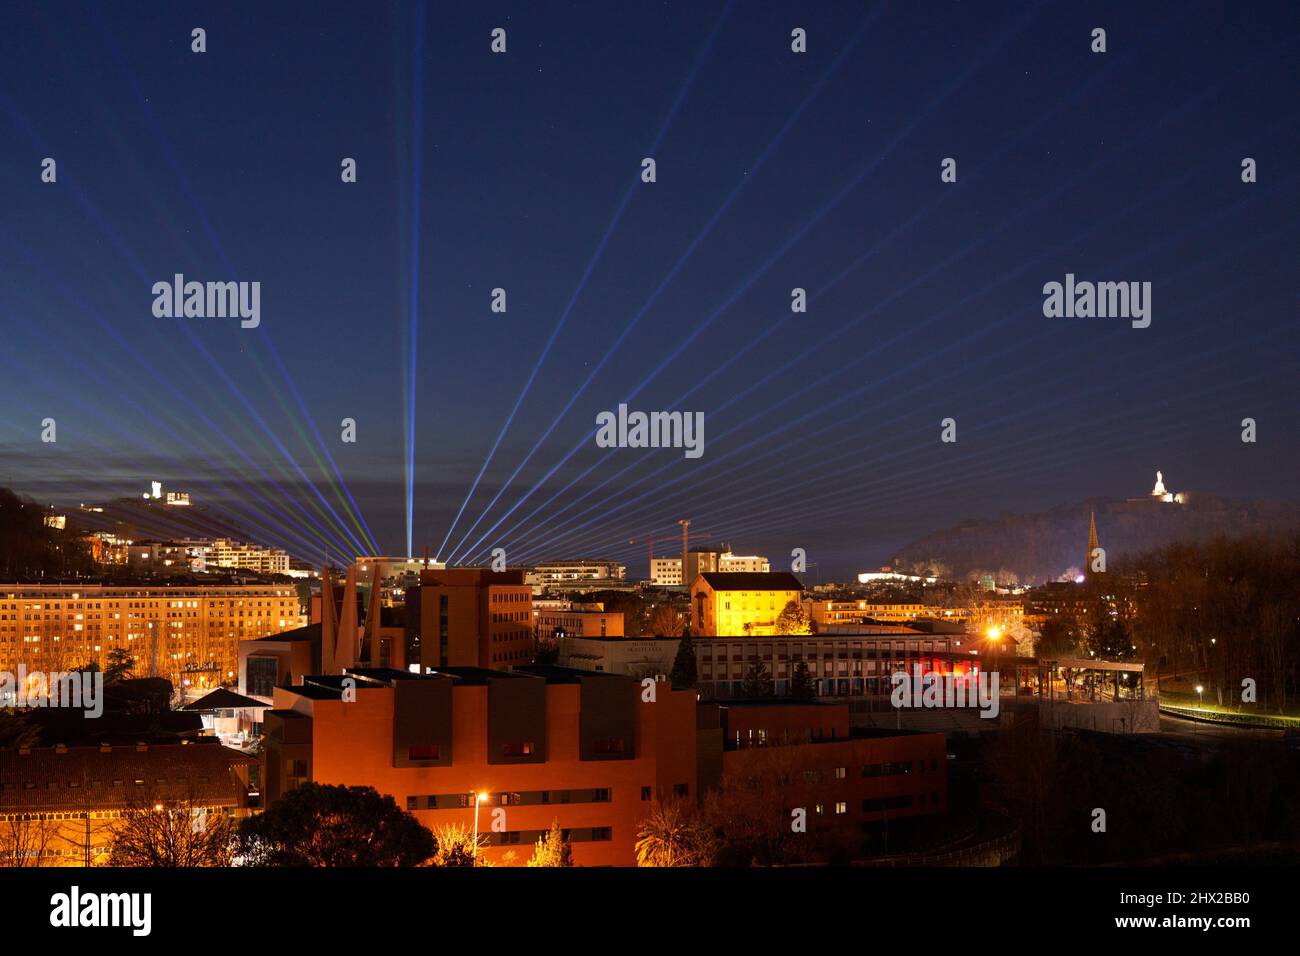 Laser lighting from Santa Clara Island, Mount Igeldo to the left and Mount Urgull to the right, San Sebastian, a cosmopolitan city of 187,000 Stock Photo